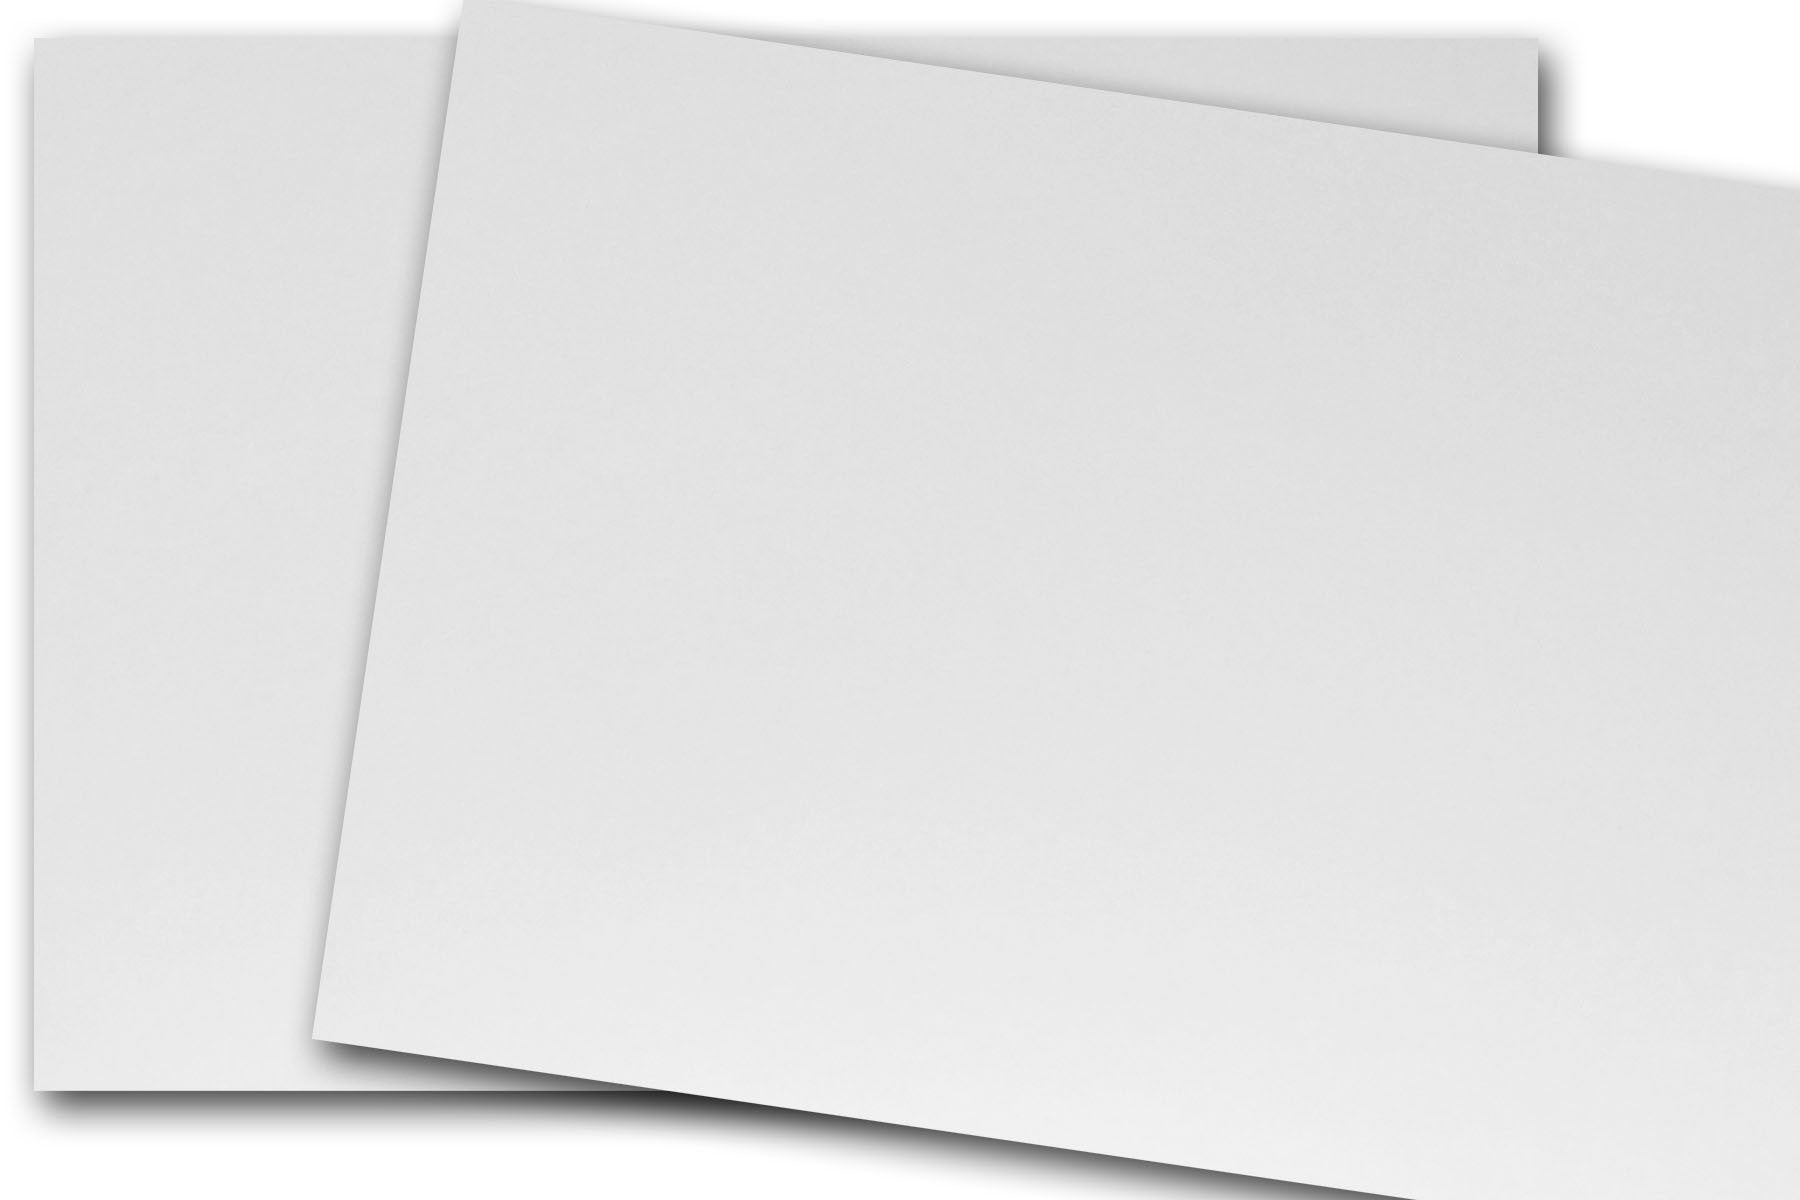 80 lb Card Stock Paper, White 8.5 x 11 for Printers and Copi